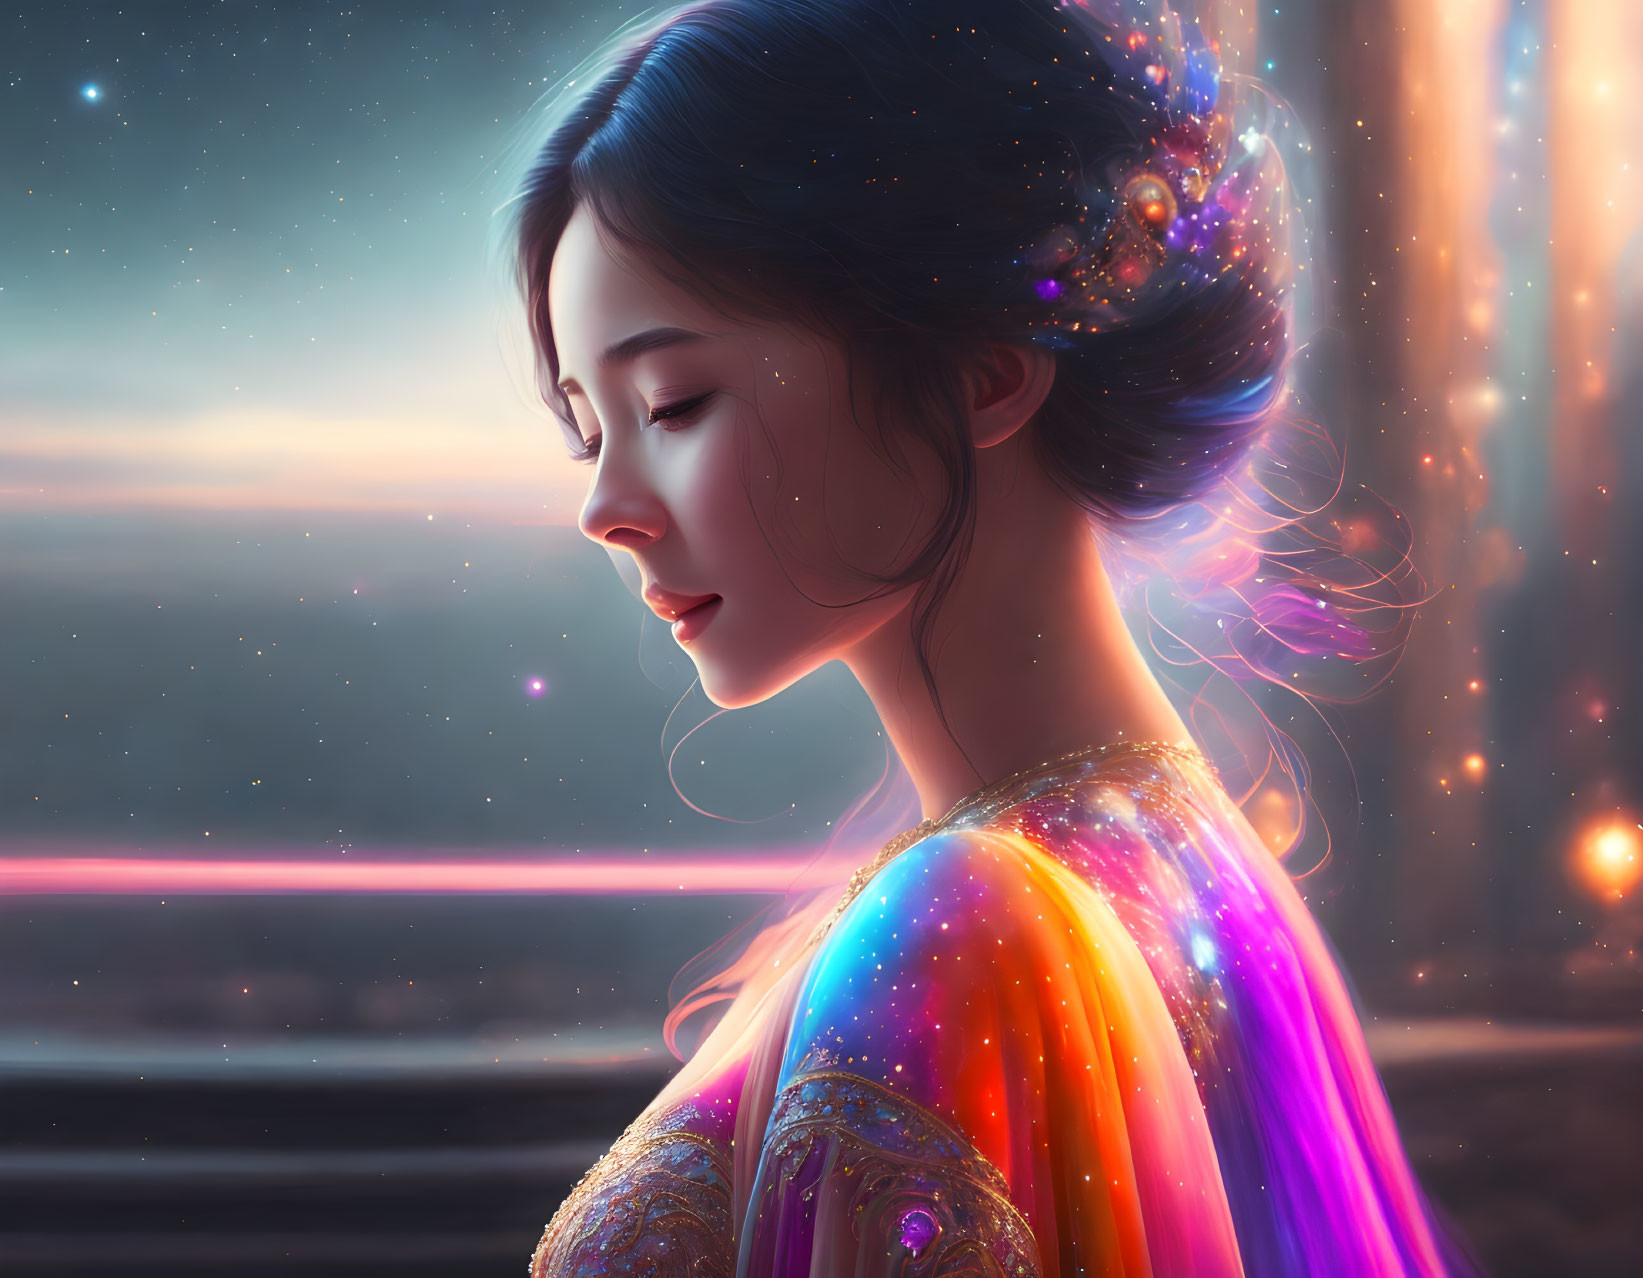 Woman with star-infused hair and rainbow dress in cosmic setting